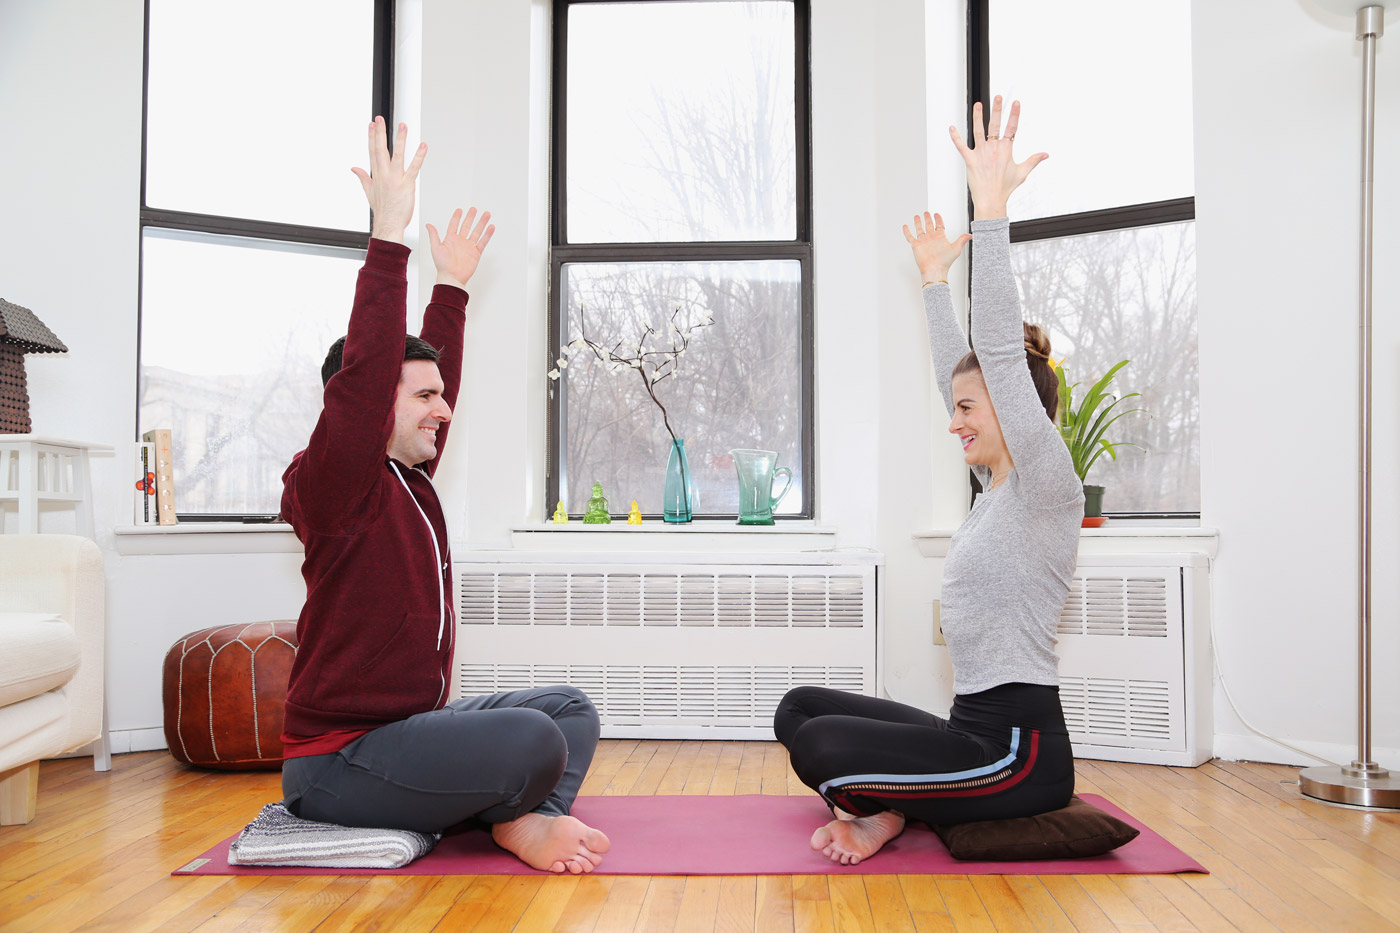 Private yoga session in Brooklyn, NY with teacher and student